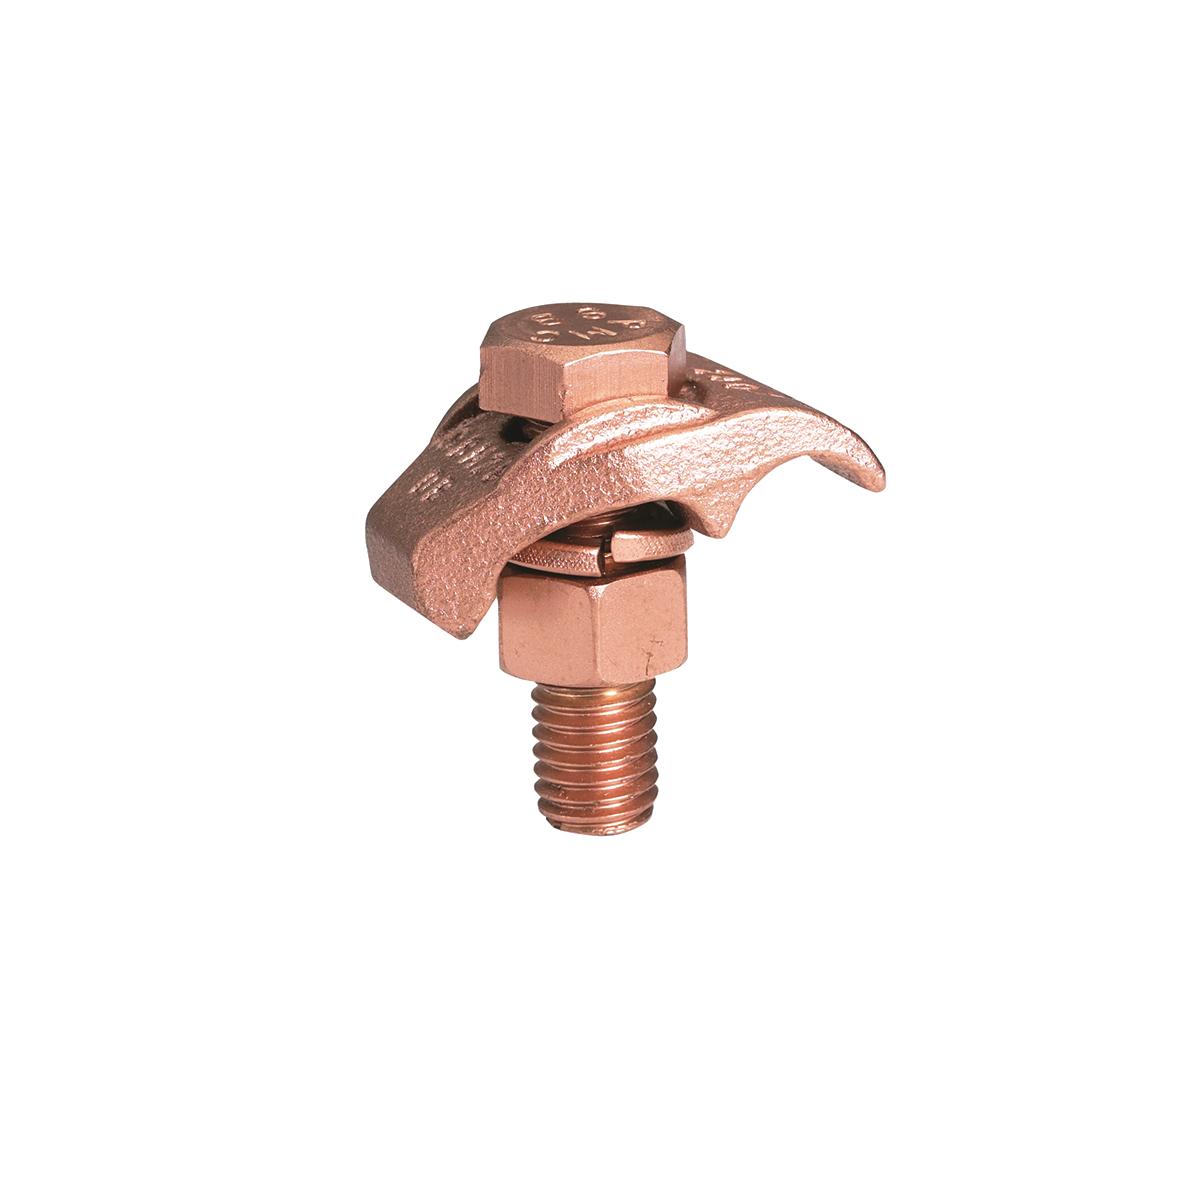 Hubbell GBM26CG31 Accommodates Bar Size 1/4" - 1/2"; Copper Cable: #4 Sol - 2/0 Str; Installation Torque: 240 in-lb. 